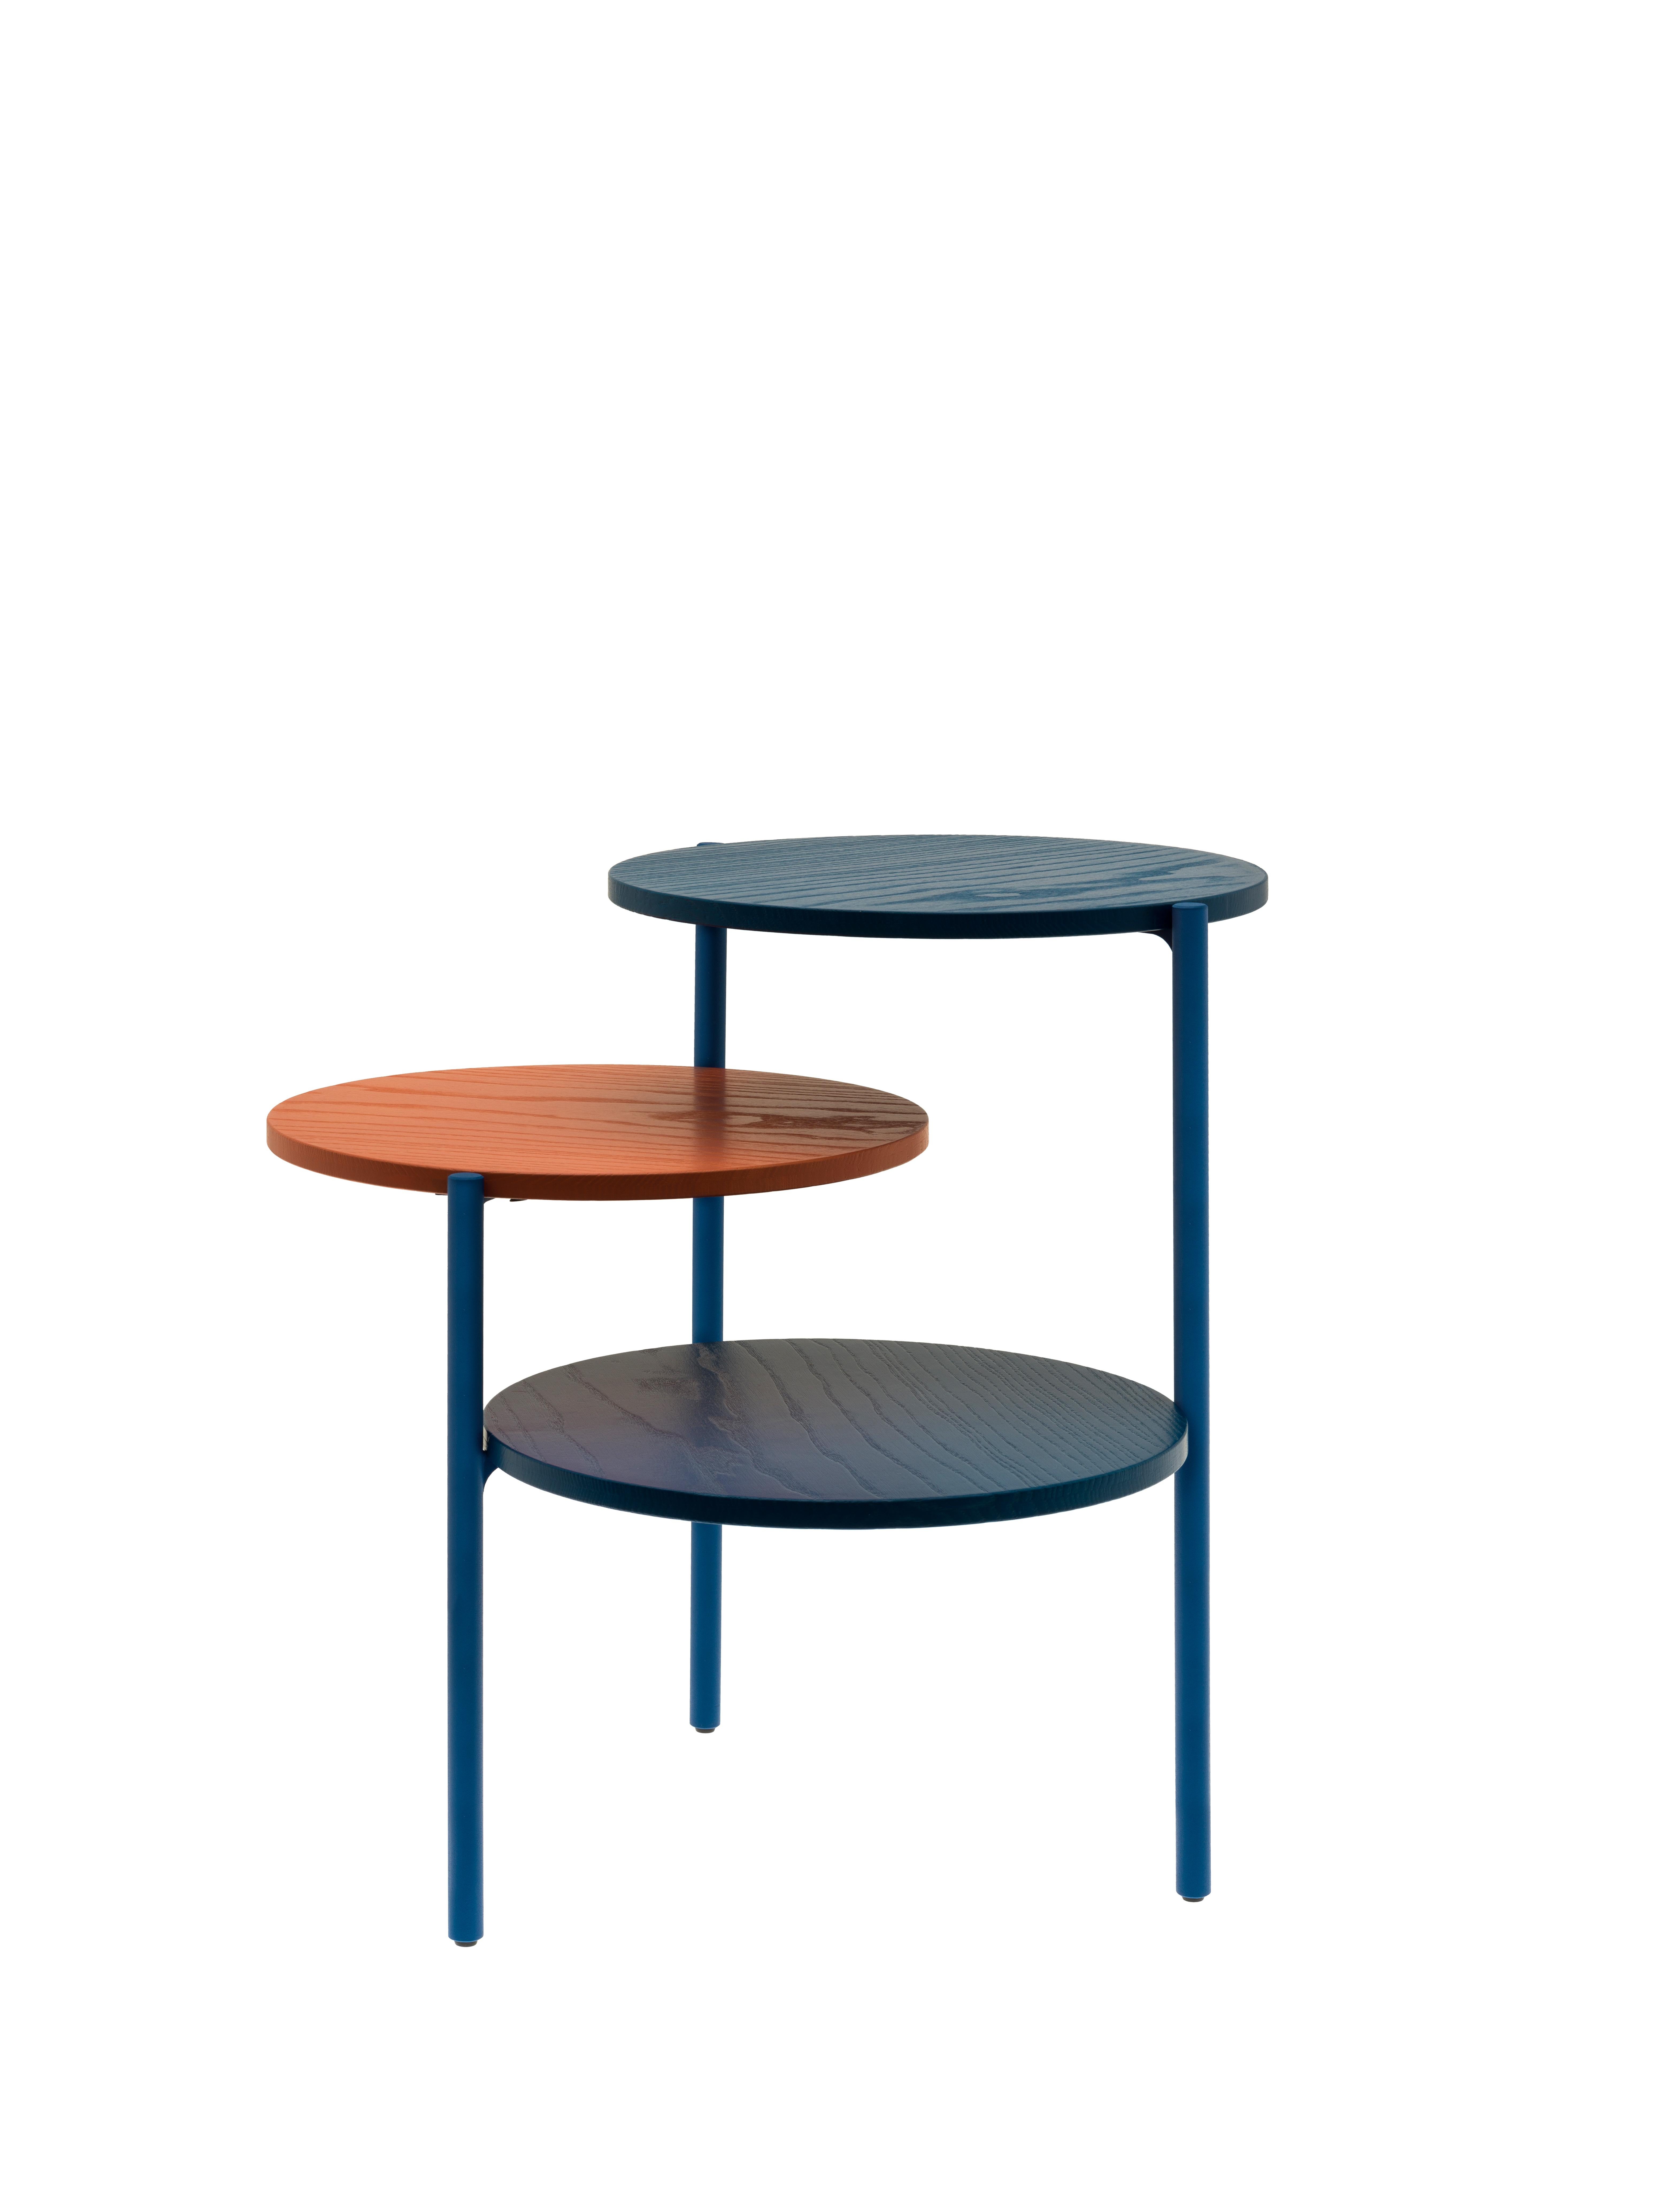 Blue & Coral triplo table by Mason Editions
Dimensions: 54 × 54 × 52.5 cm
Materials: iron, ash
Colours: total black, total blue, total light grey, blue + coral, black + light grey, light grey + pumpkin

This side table is based on the concept of